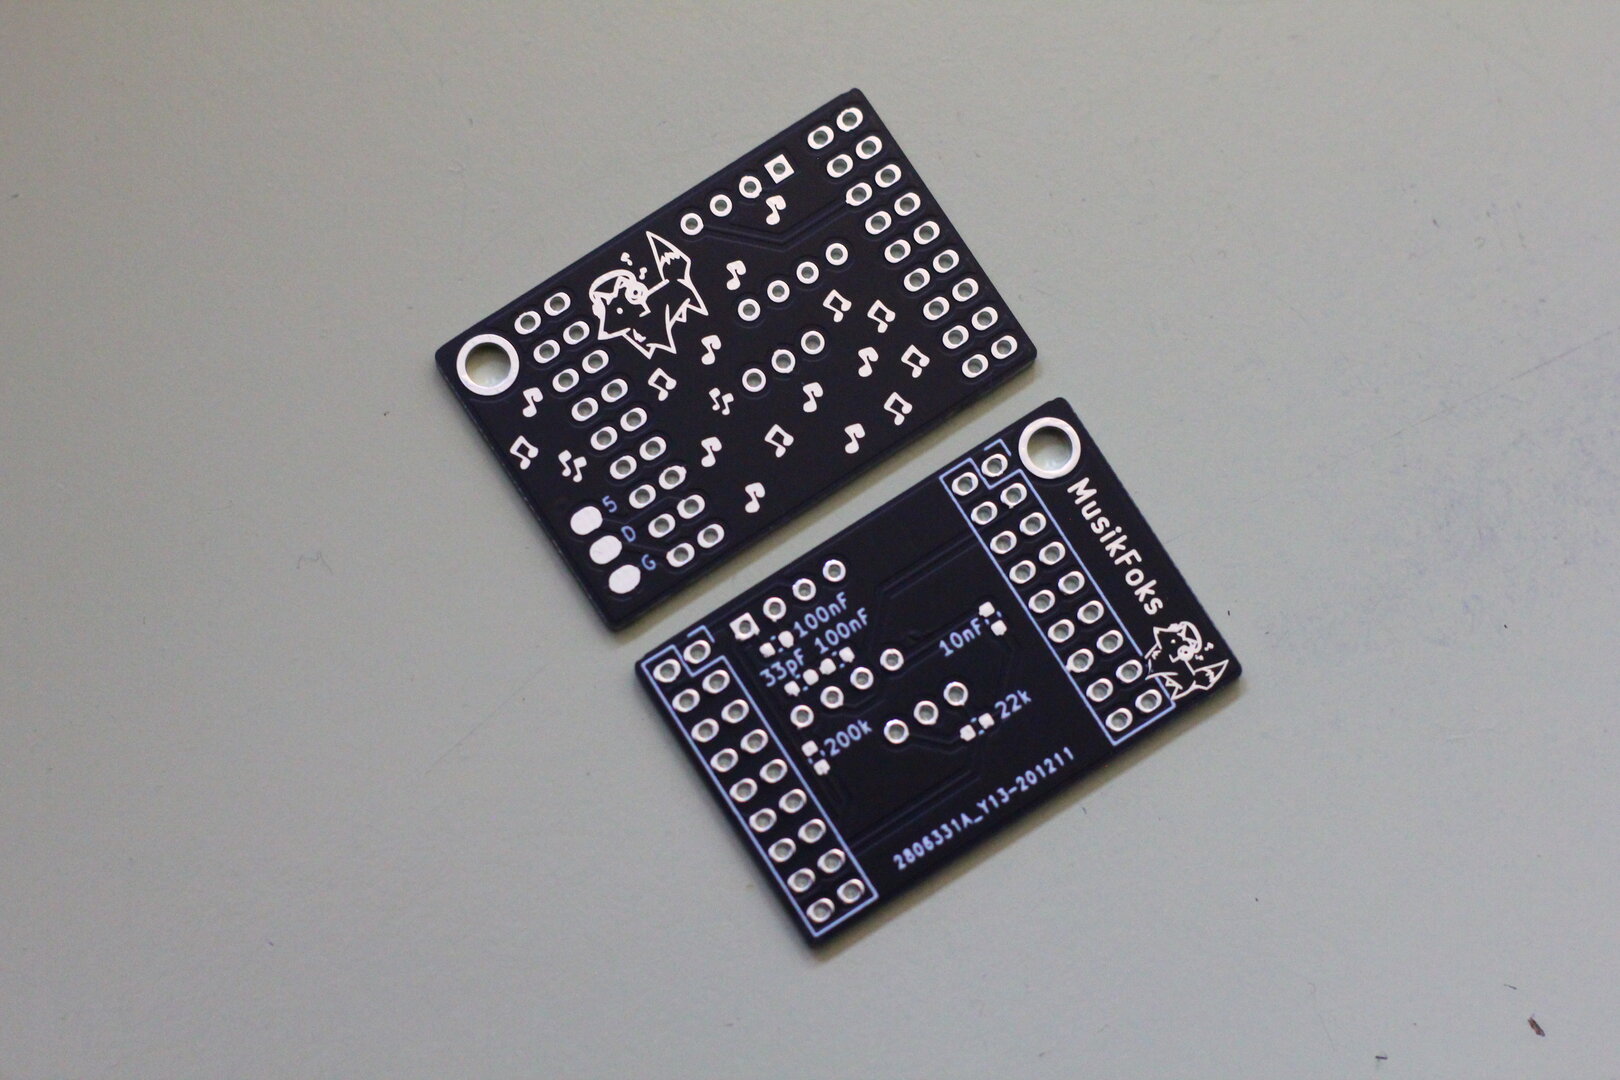 Two rectangular PCB's, decorated with a foks listening to headphones, with music notes sprawled around